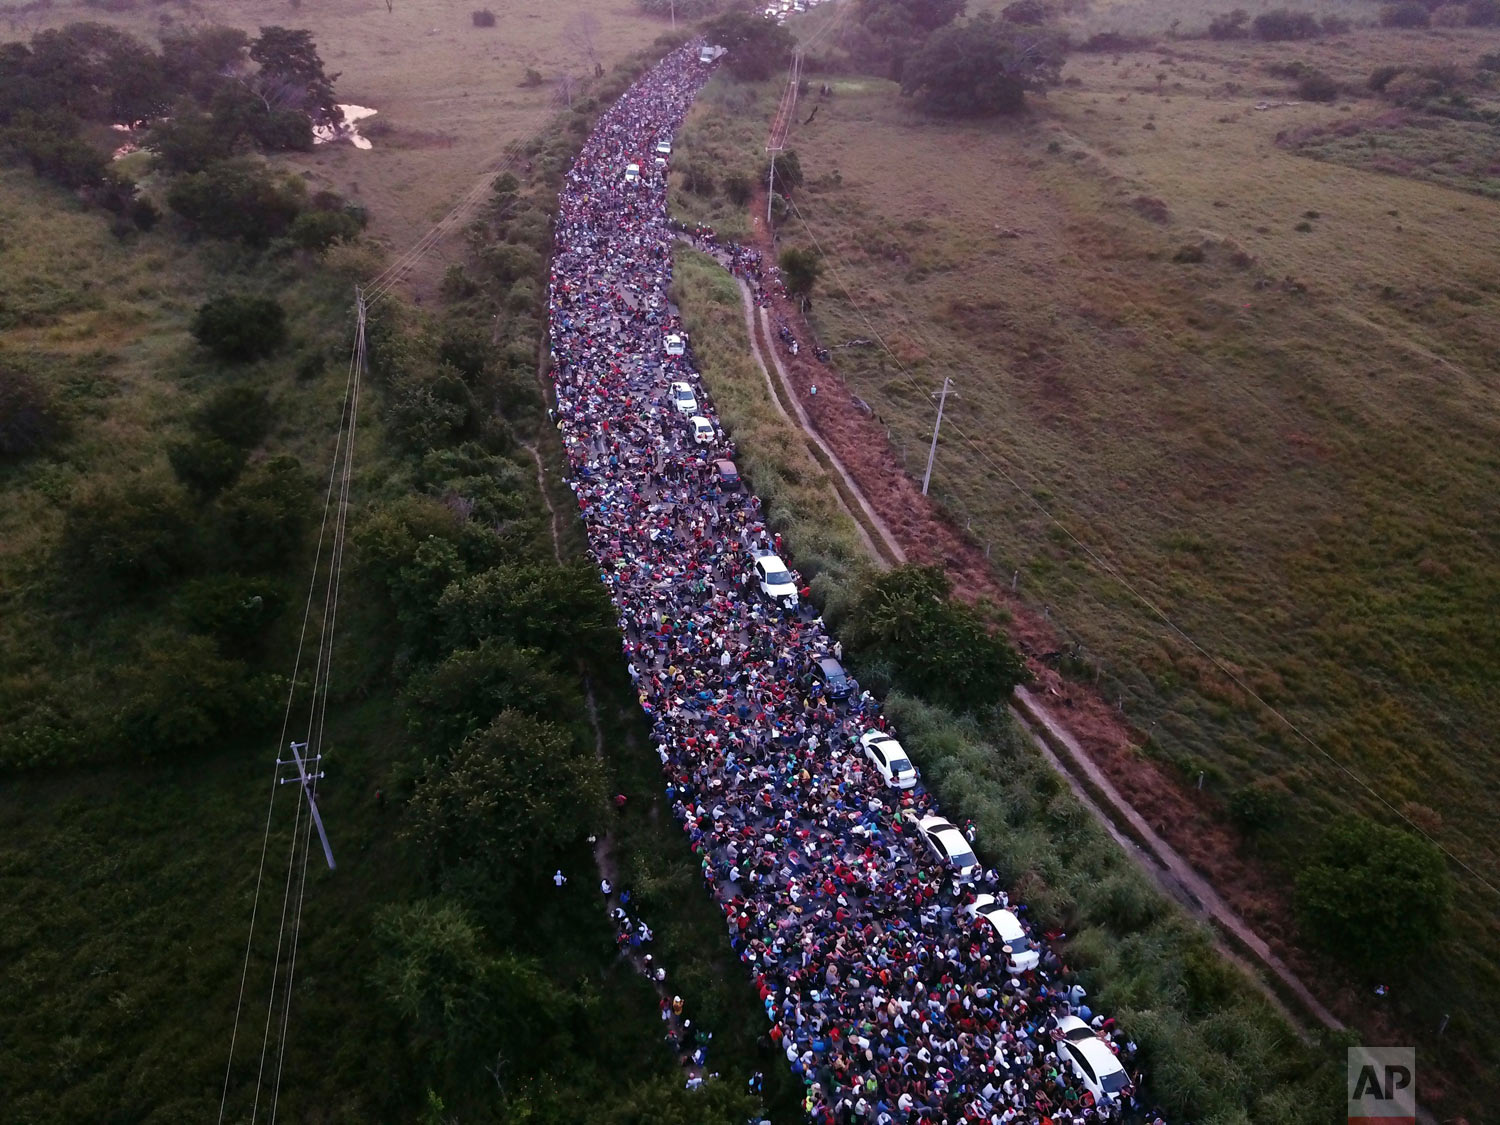  Members of a US-bound migrant caravan cross a bridge between the Mexican states of Chiapas and Oaxaca after federal police briefly blocked them outside the town of Arriaga, Saturday, Oct. 27, 2018. Hundreds of Mexican federal officers carrying plast